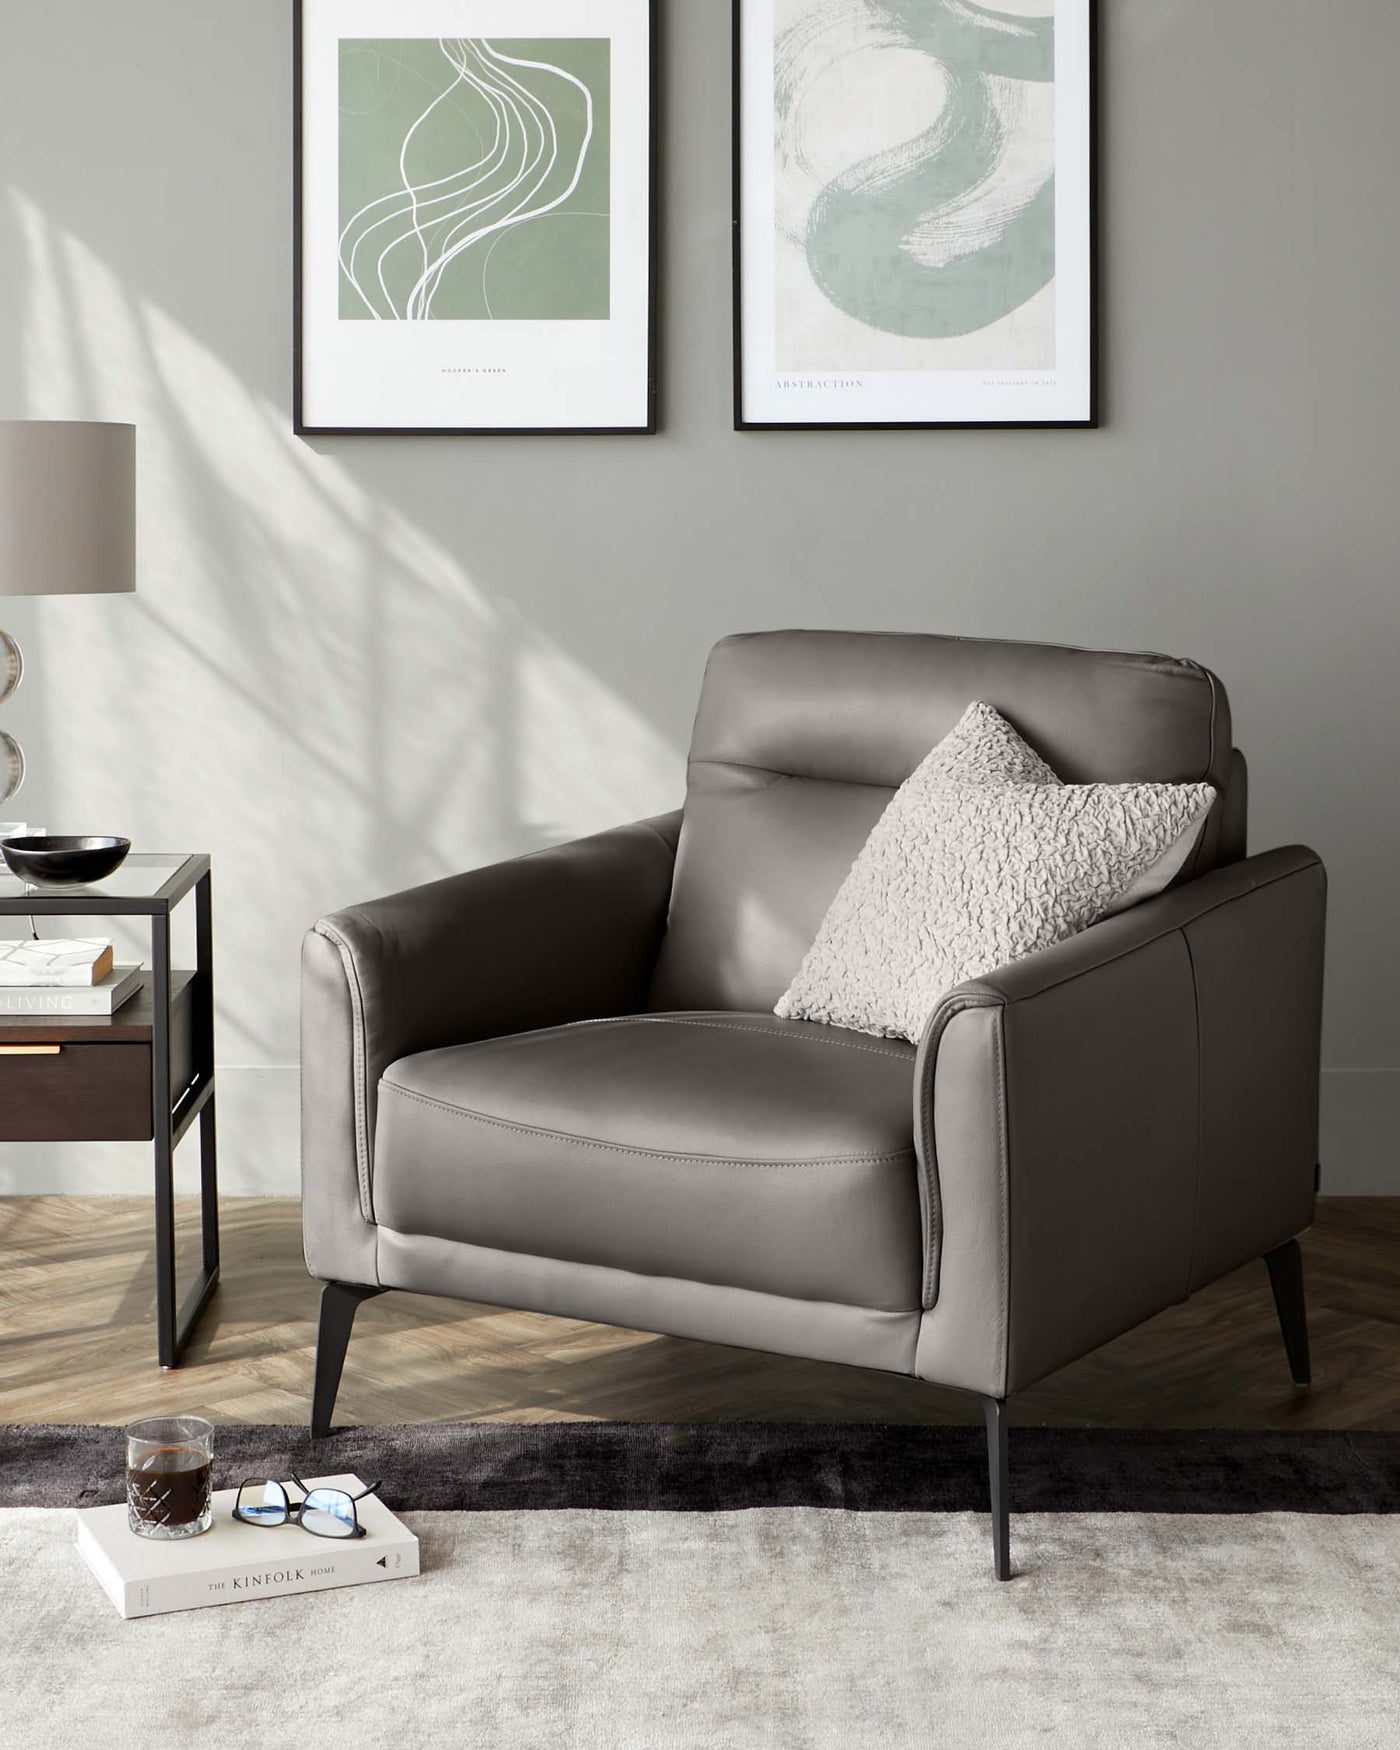 Modern grey leather armchair with a textured throw pillow, complemented by a sleek black side table with a round top, situated on a grey and black area rug against a wall adorned with framed abstract art pieces.